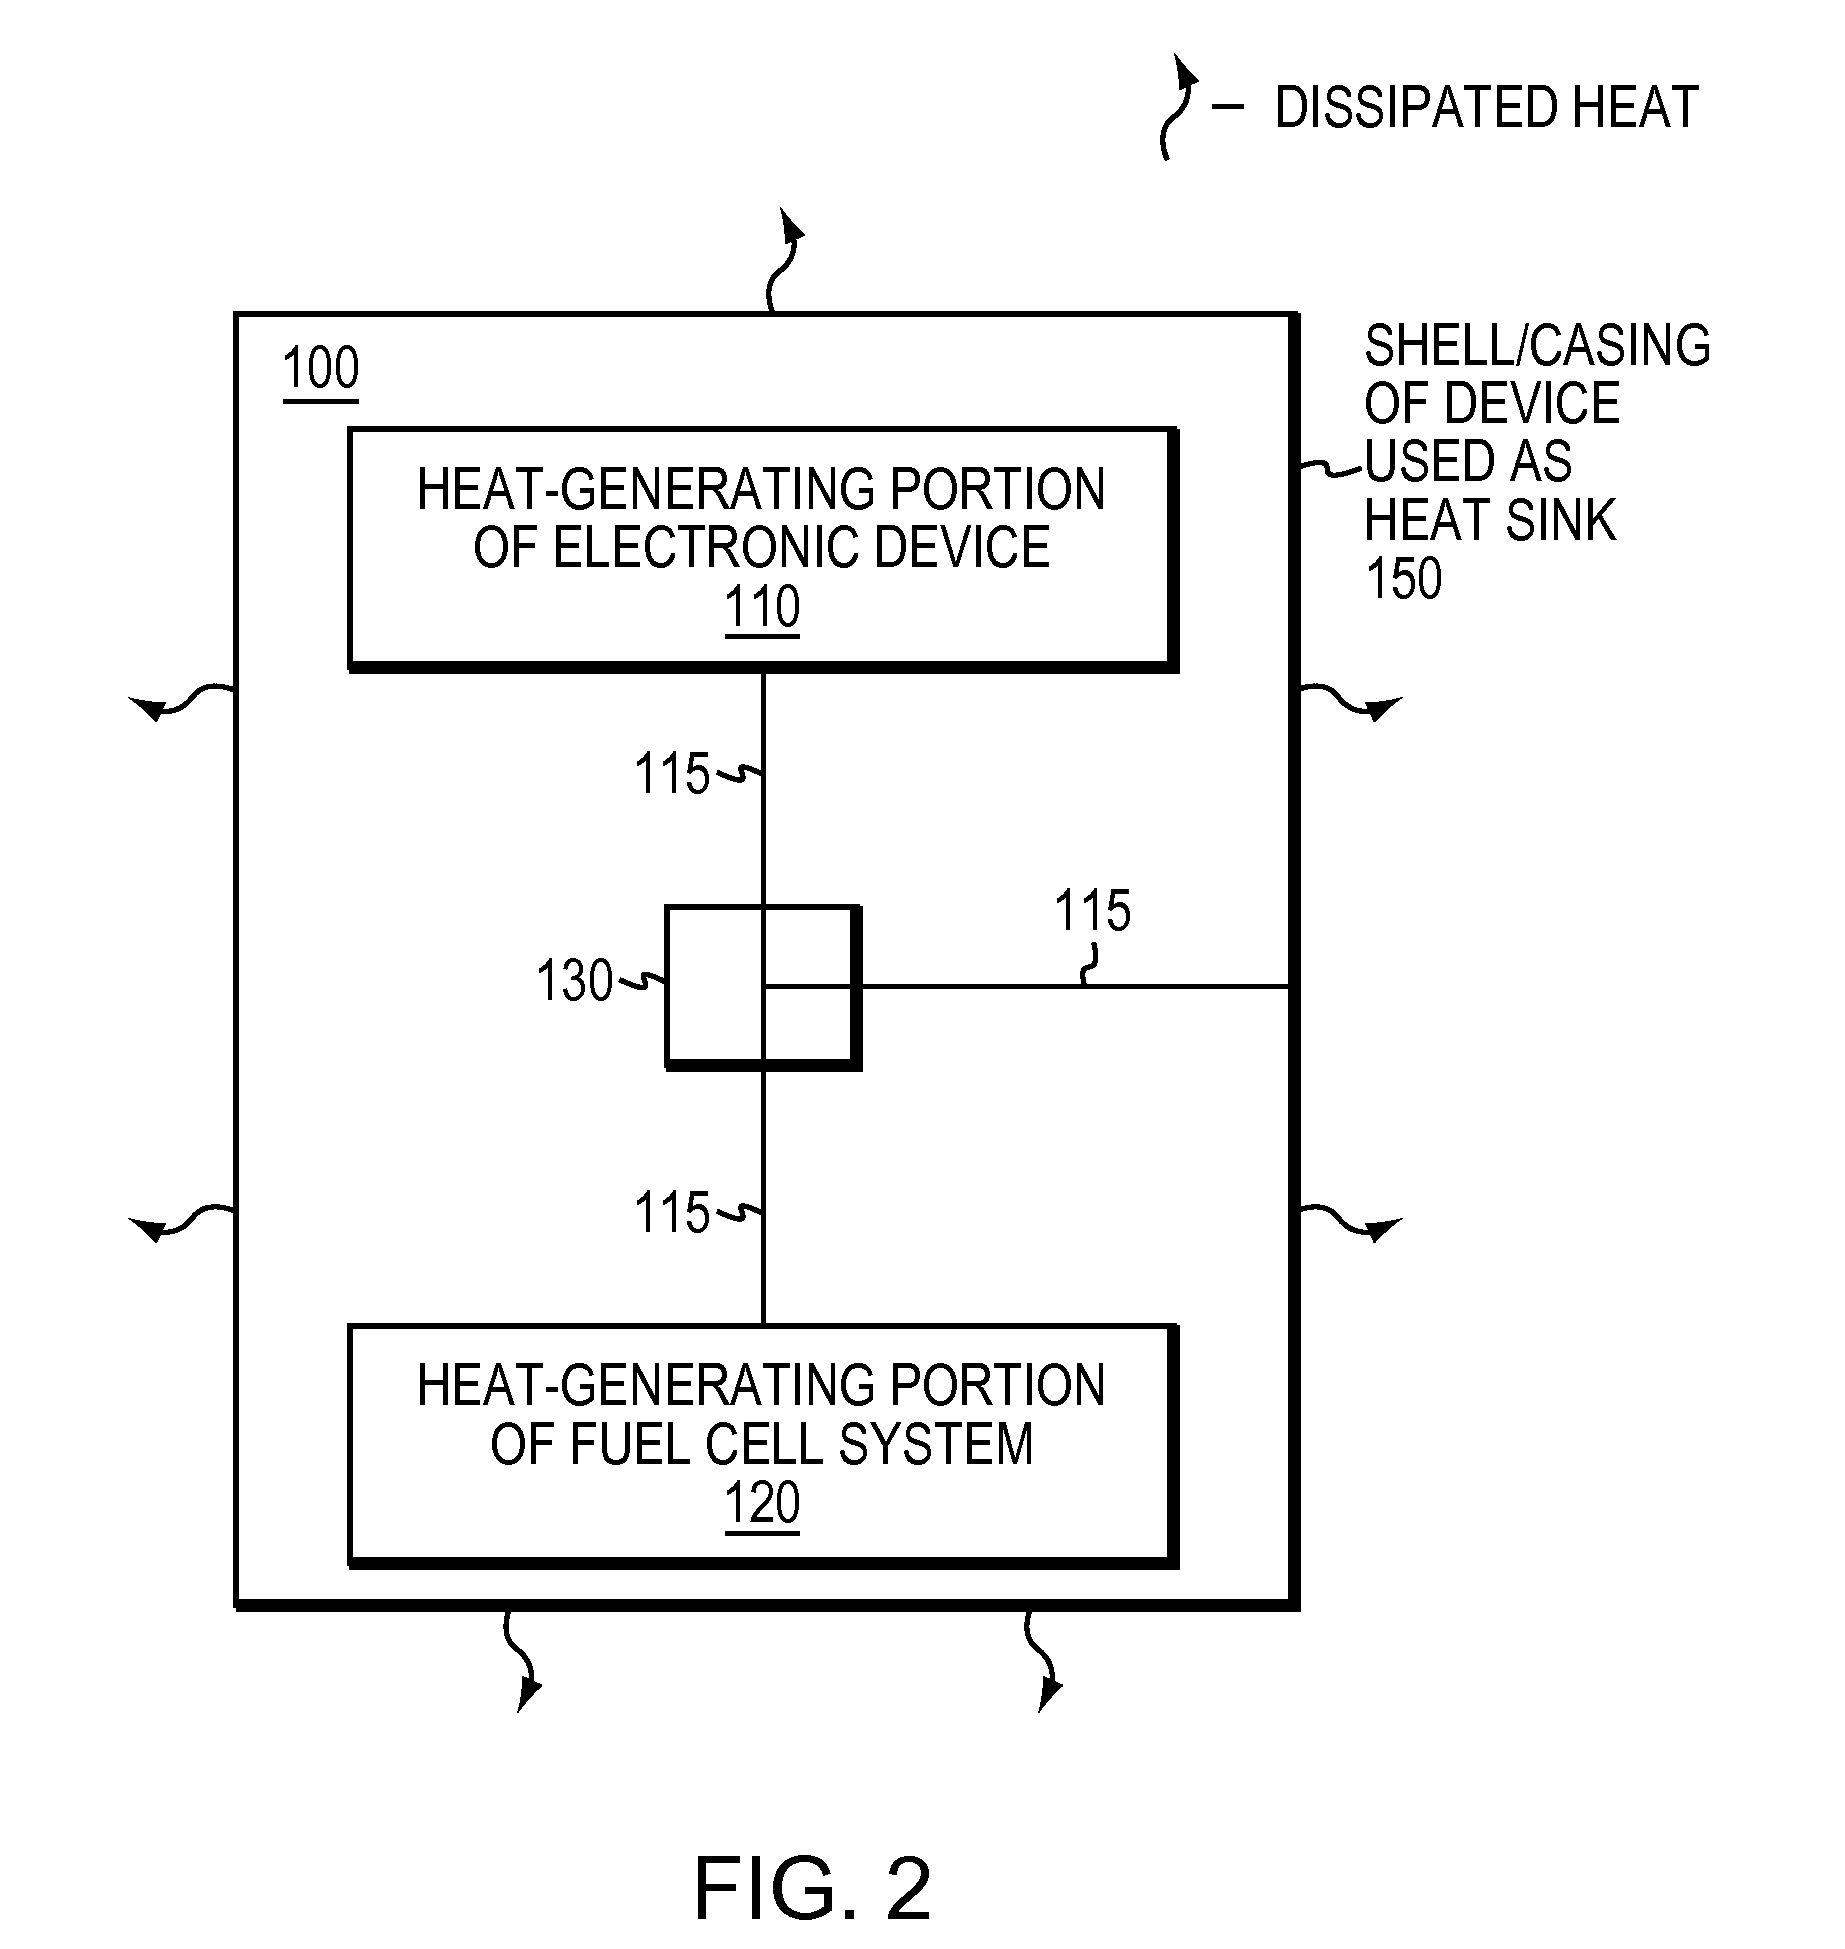 Integrated thermal management of a fuel cell and a fuel cell powered device